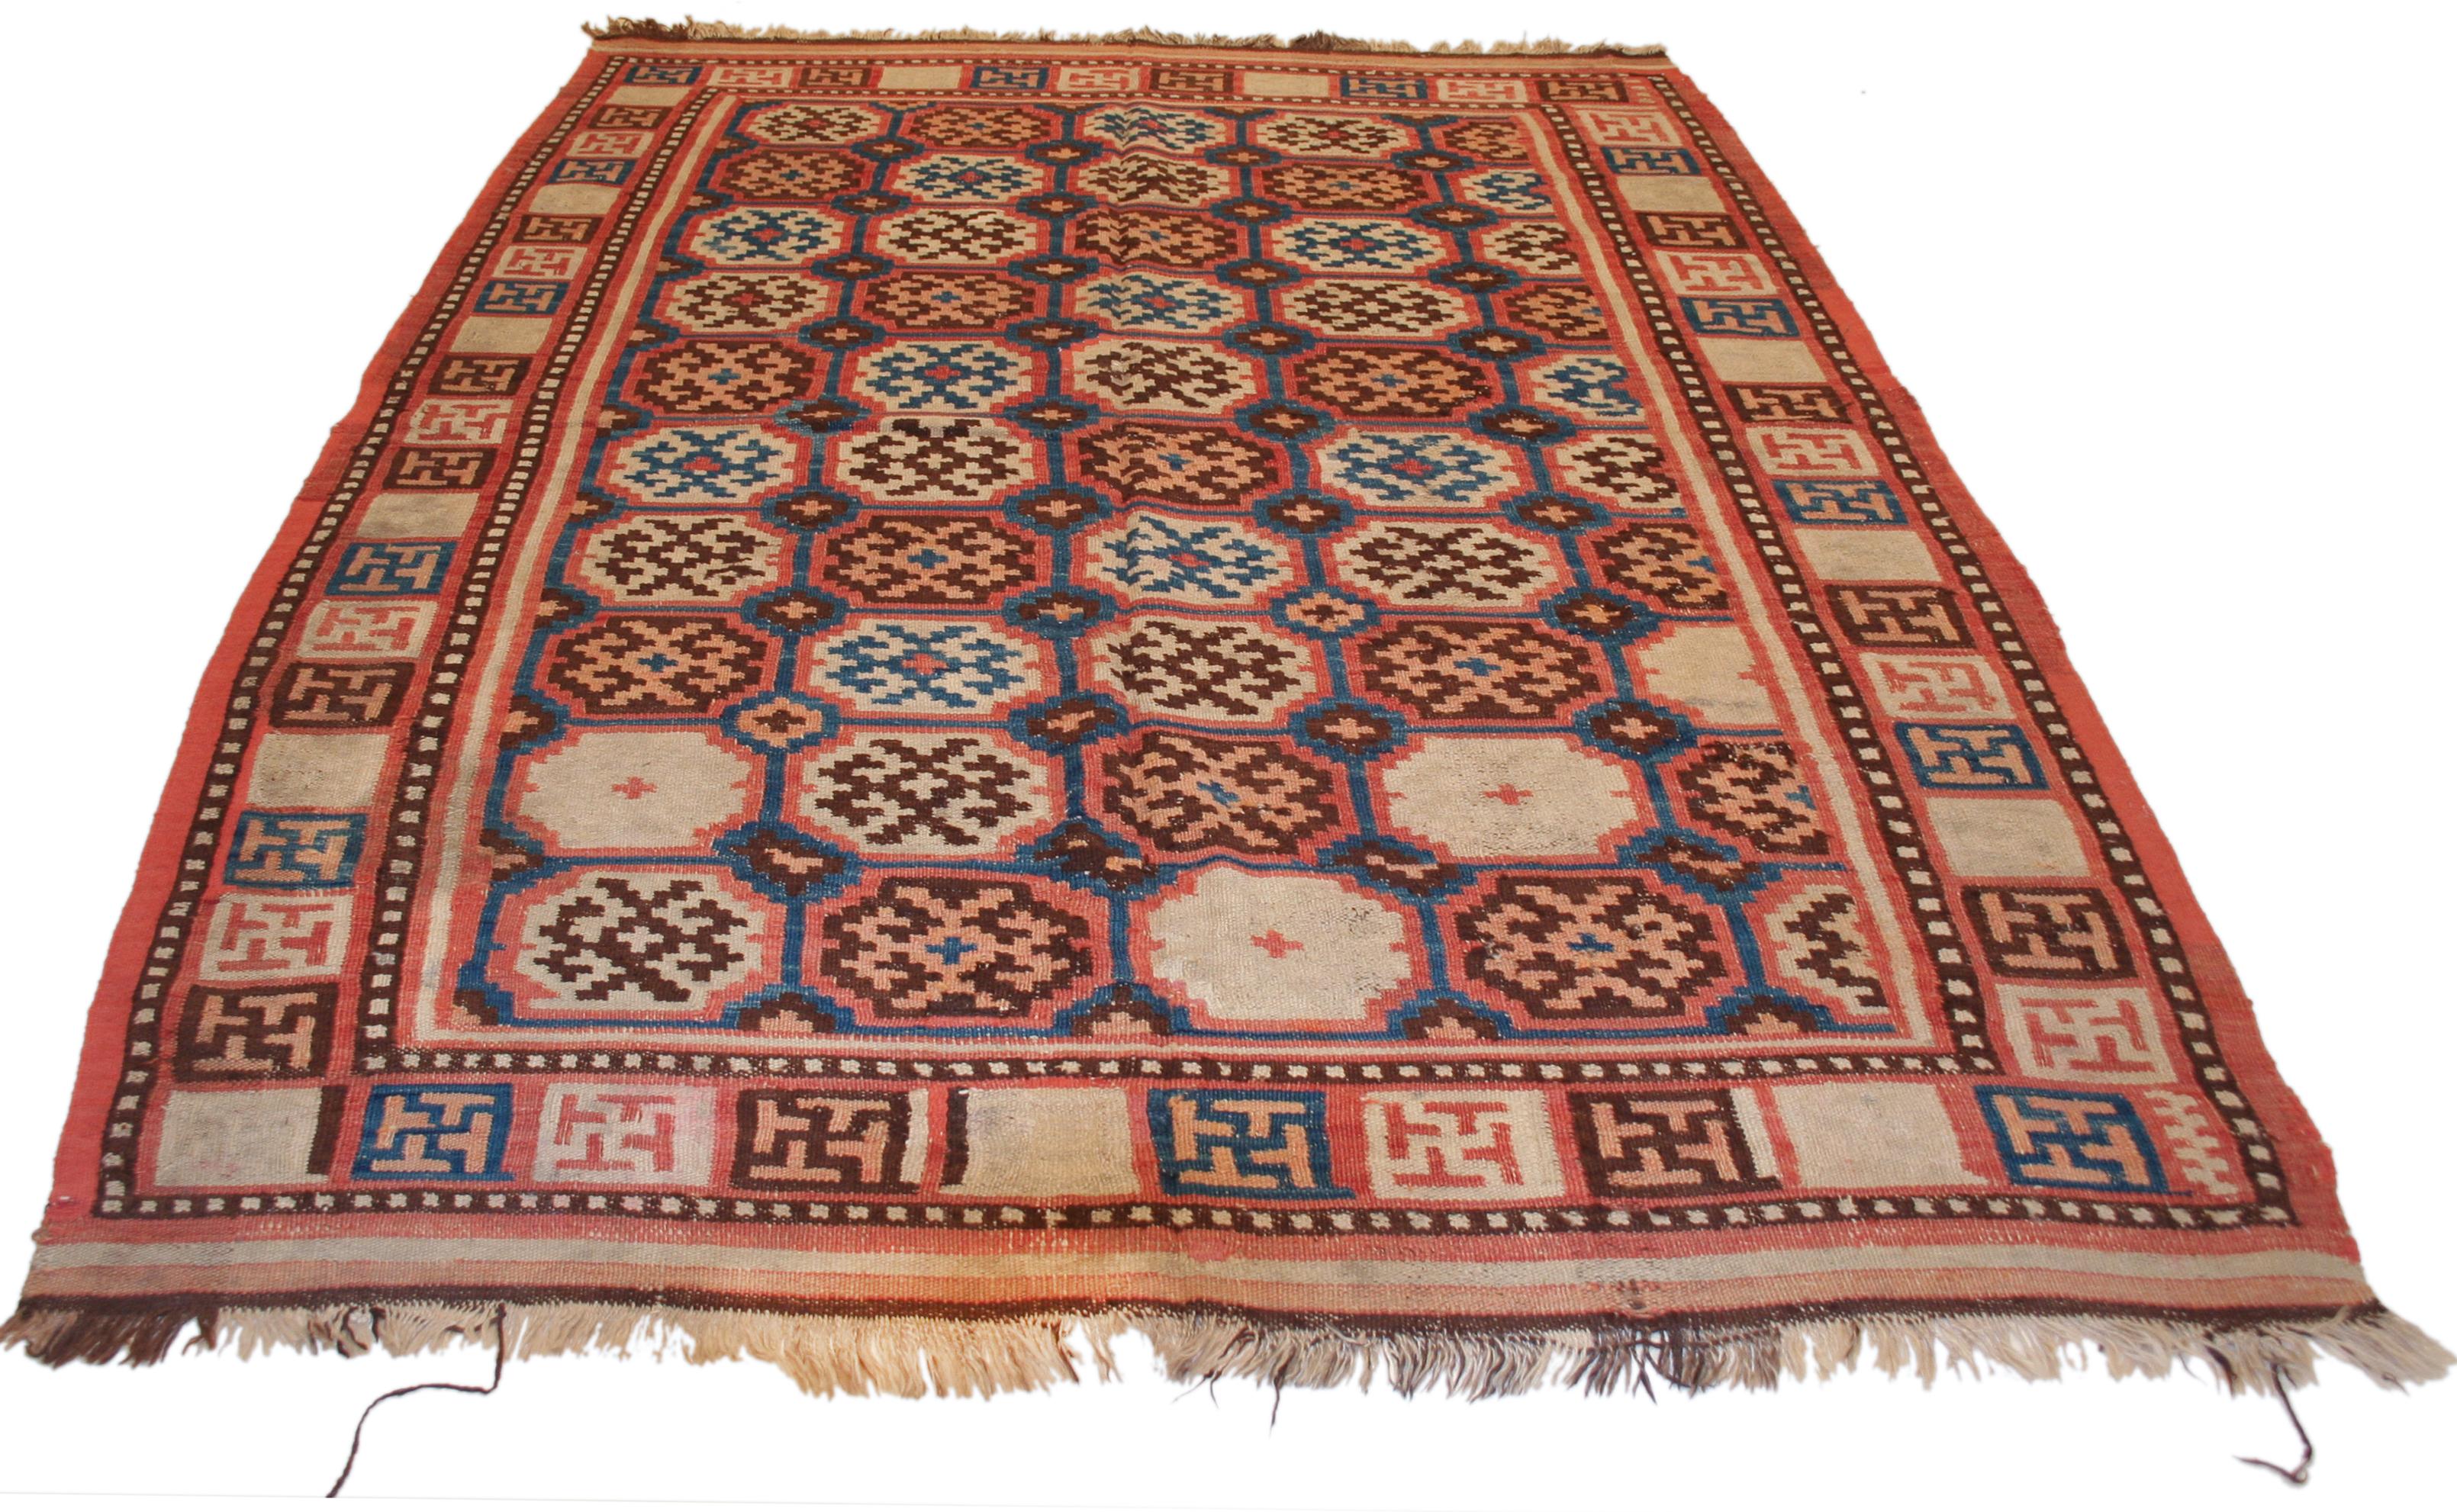 A rare and unusual flat woven cover from the Khotan oasis in eastern Turkestan, distinguished by a honeycomb arrangement of octagons containing polychrome stepped lozenges with hooked extensions. We see similar patterns in the early pile rugs of